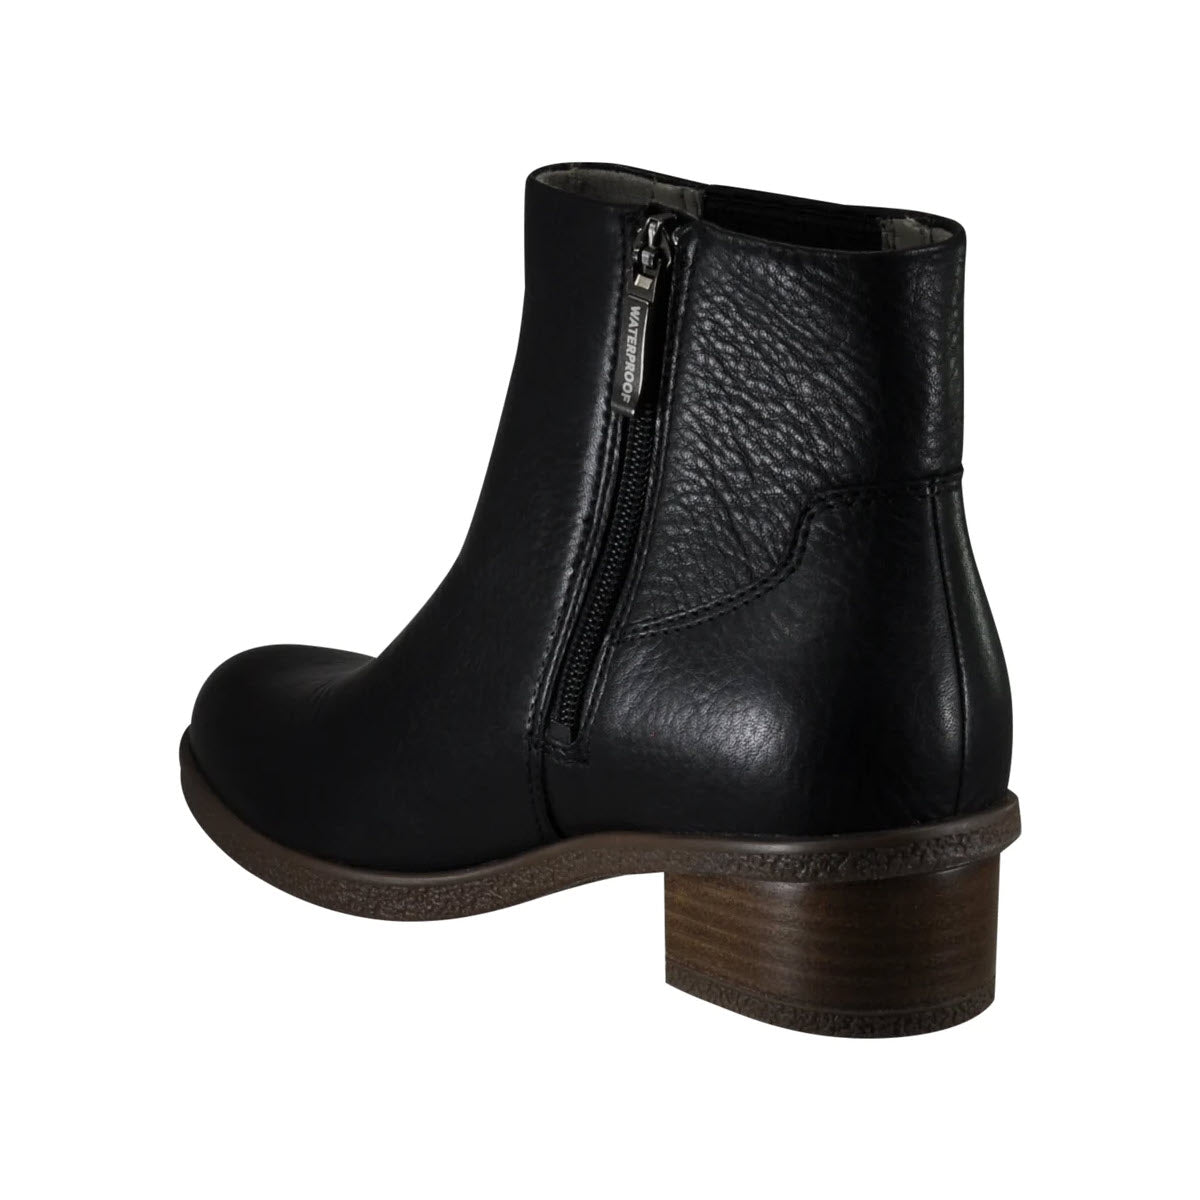 Dansko Daisie Black leather waterproof Chelsea boot with a side zipper and a low, stacked heel, isolated on a white background.